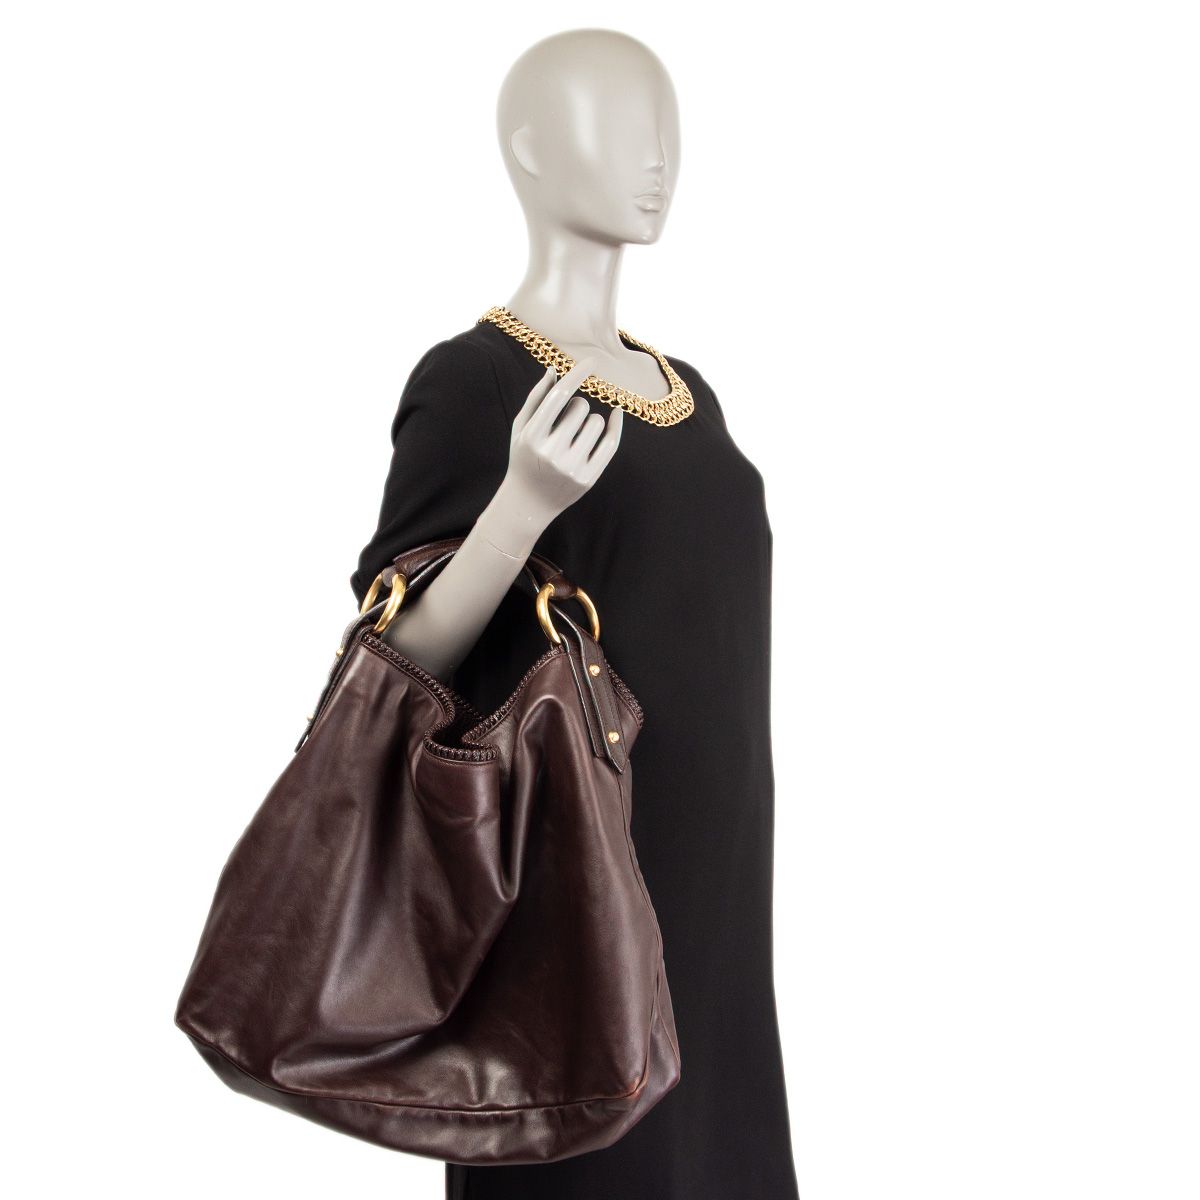 Monarchy Slippery while Gucci Horsebit Shoulder Bag Brown Leather